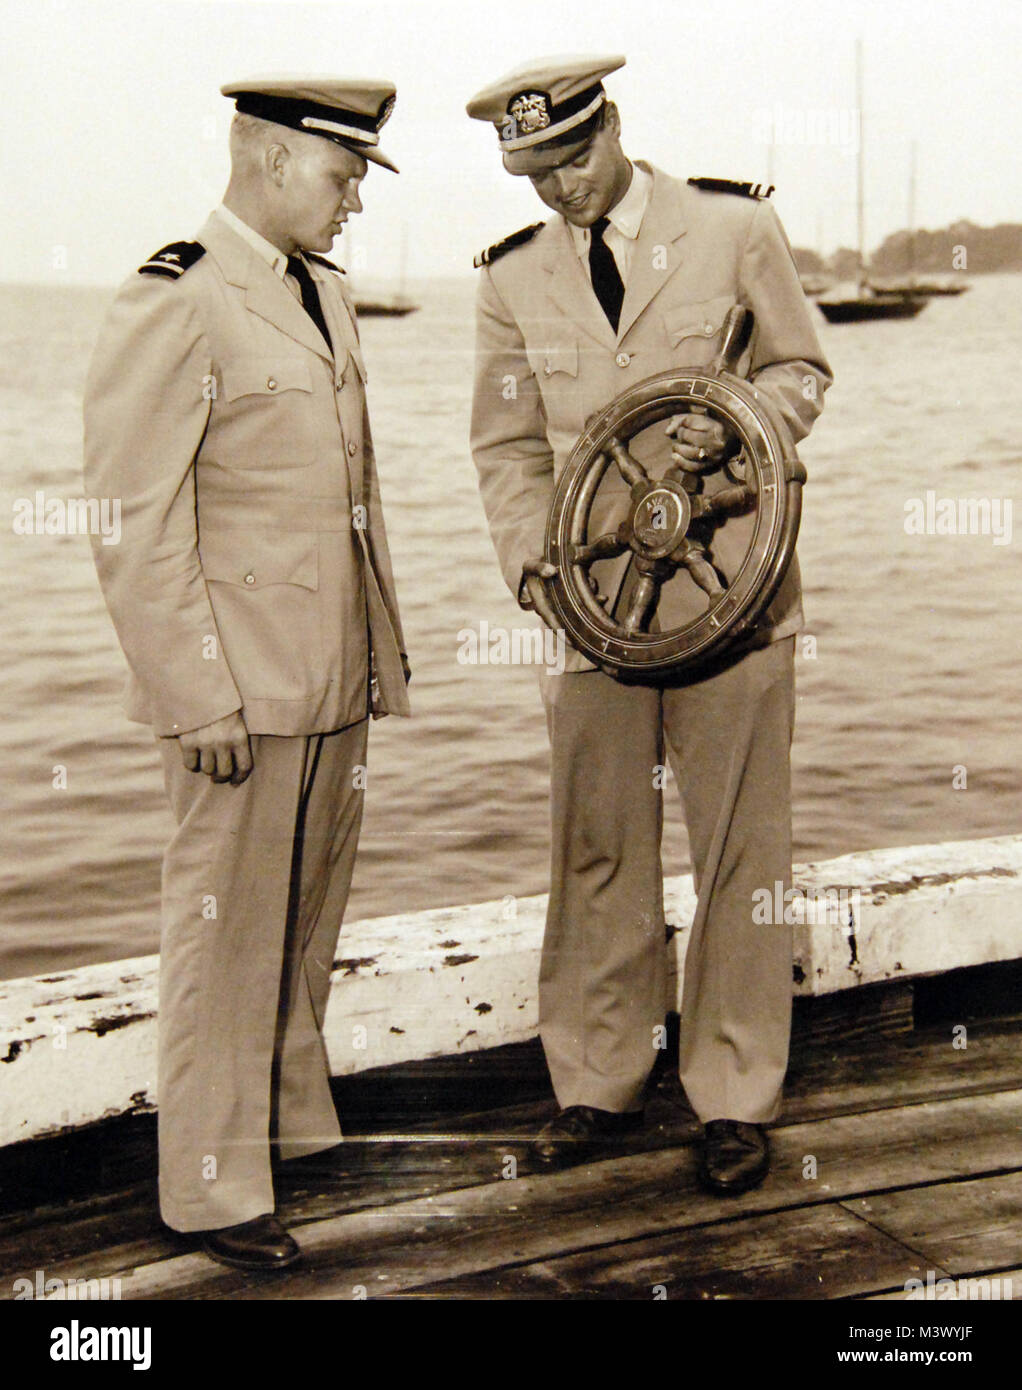 80-G-680535:  Wheel from the auxiliary yawl, Avanti, which was destroyed during Hurricane Carol in 1954, has been presented to the Naval Academy, Annapolis, Maryland, as a permanent sailing trophy by Mr. Walter Rothschild of Brooklyn, New York.   Looking over the newest sailing trophy are Ensign G.T. Akins, left, and Lieutenant Junior Grade J. M. McDonald.  Official U.S. Navy Photograph, now in the collections of the National Archives.  (2018/01/17). 80-G-680535 38850490185 o Stock Photo